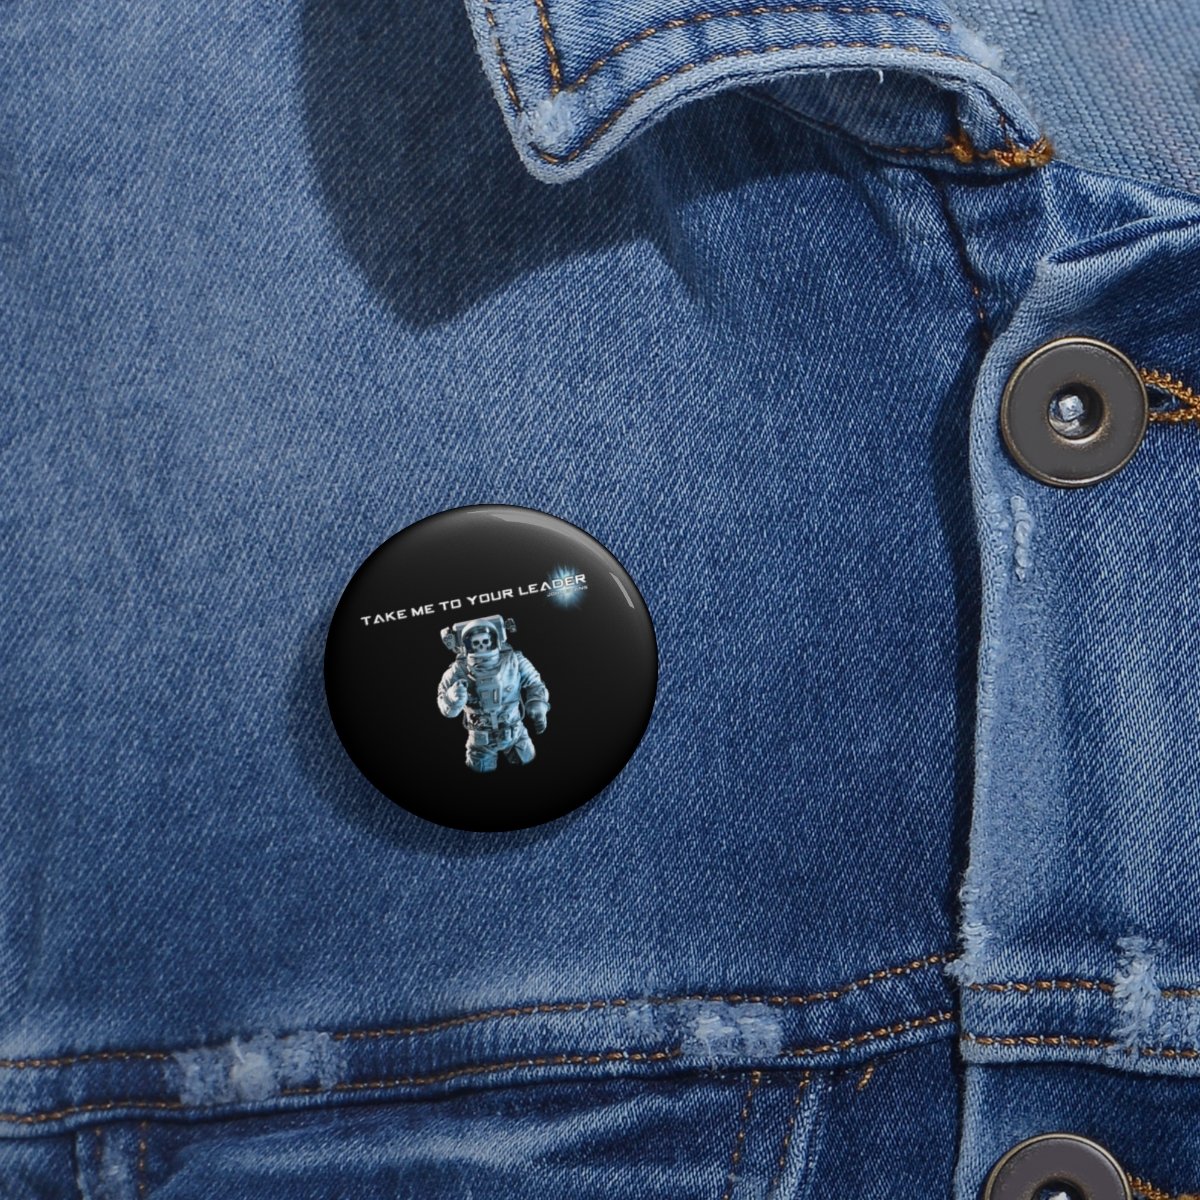 John Evans – Take Me To Your Leader Pin Buttons